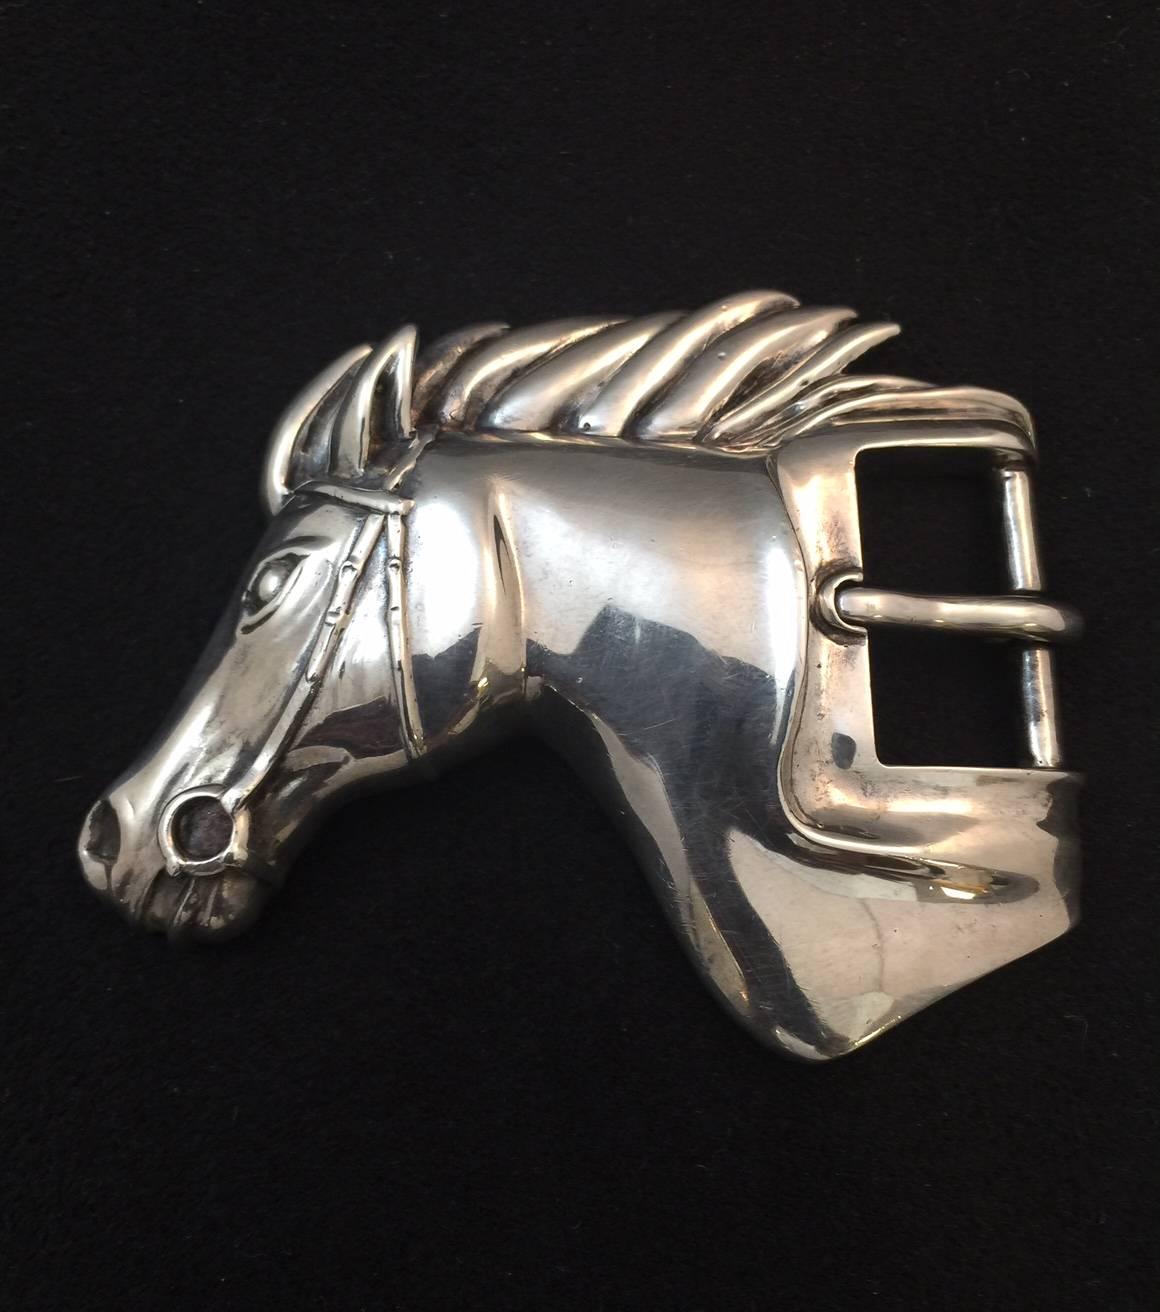 The horse has always been a beloved animal.  Majestic, proud and athletic.  Kieselstein Cord has captured the movement in a meticulously crafted Equestrian themed horse head buckle in Sterling Silver.  He appears to be in full gallop while sitting